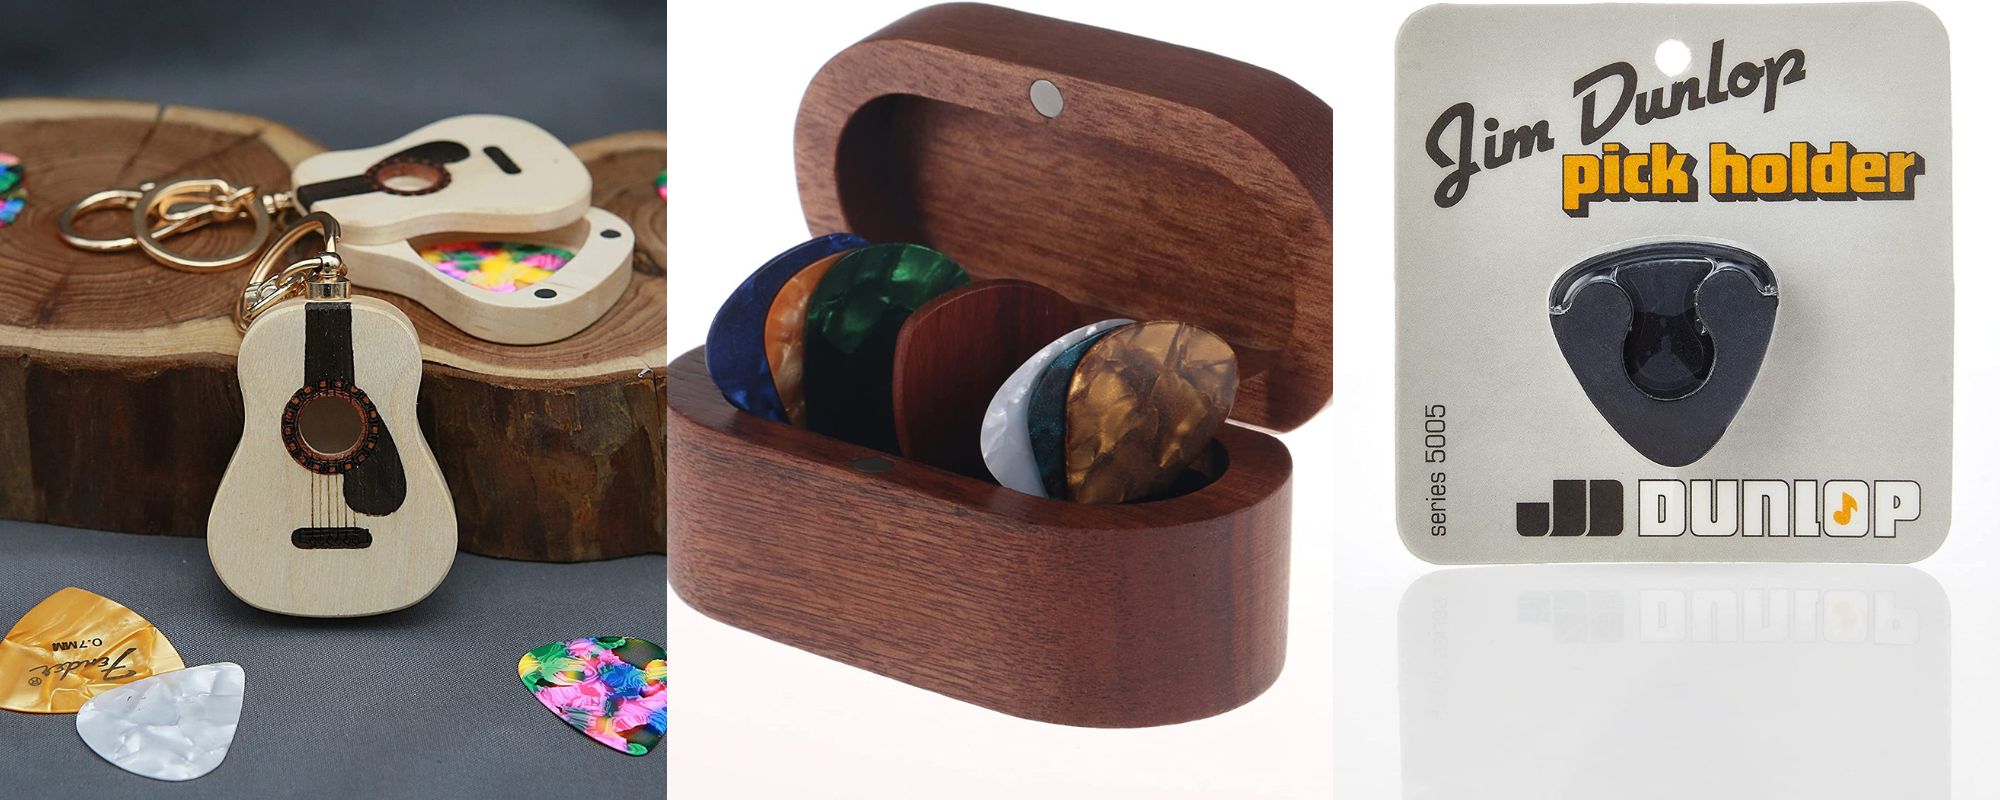 Organize Your Picks with a Latest & Stylish Guitar Pick Holder.